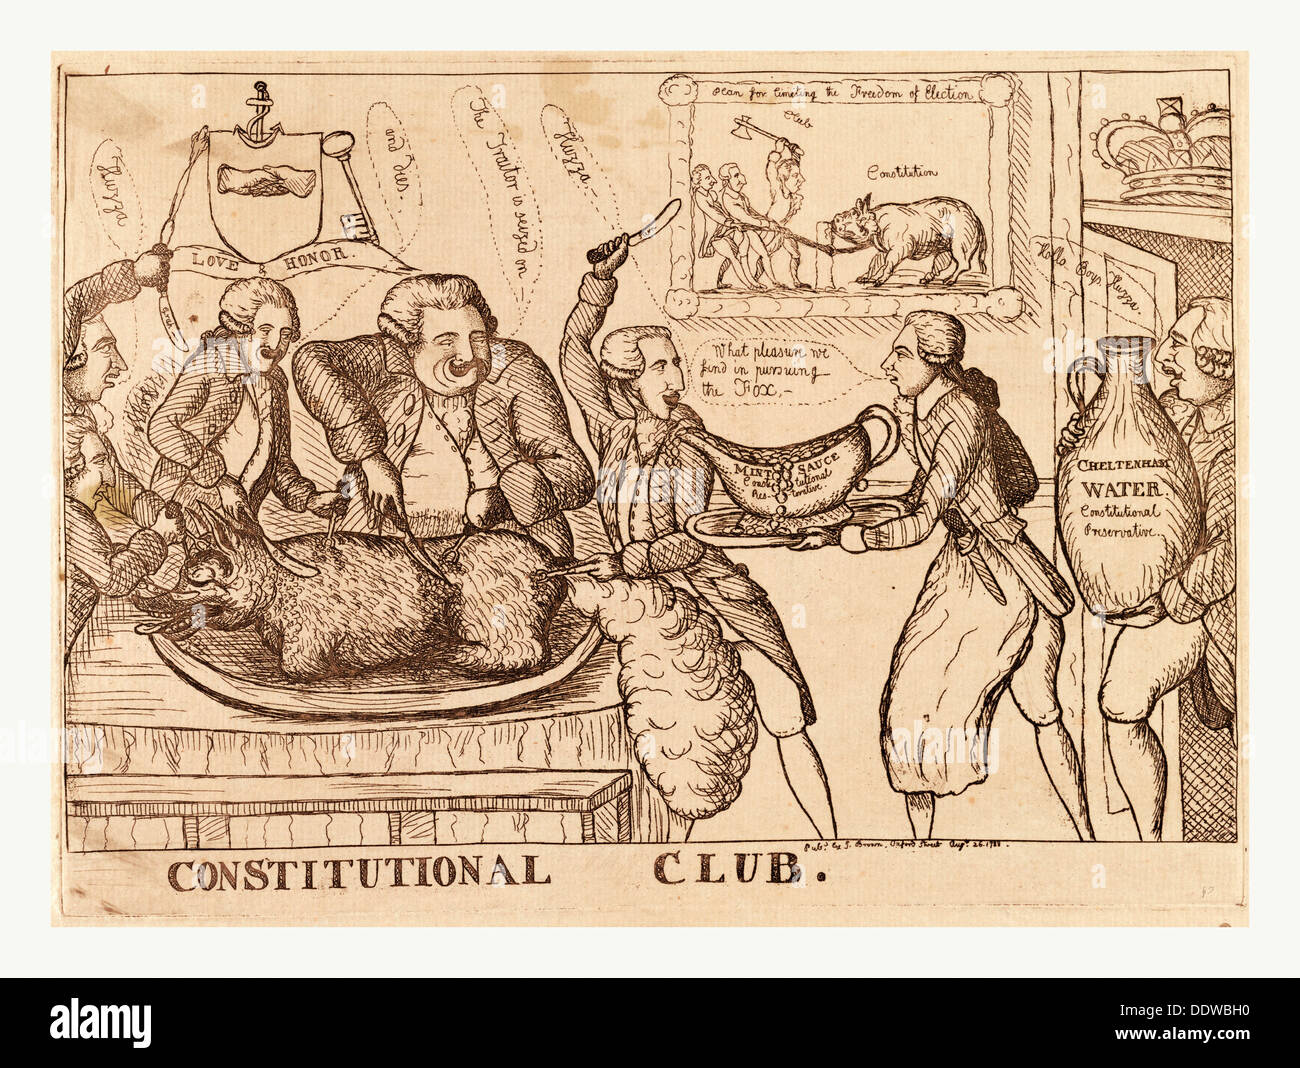 Constitutional Club, Dent, William, active 1741-1780, artist, England, satire on the Westminster by-election of 1788 shows Stock Photo